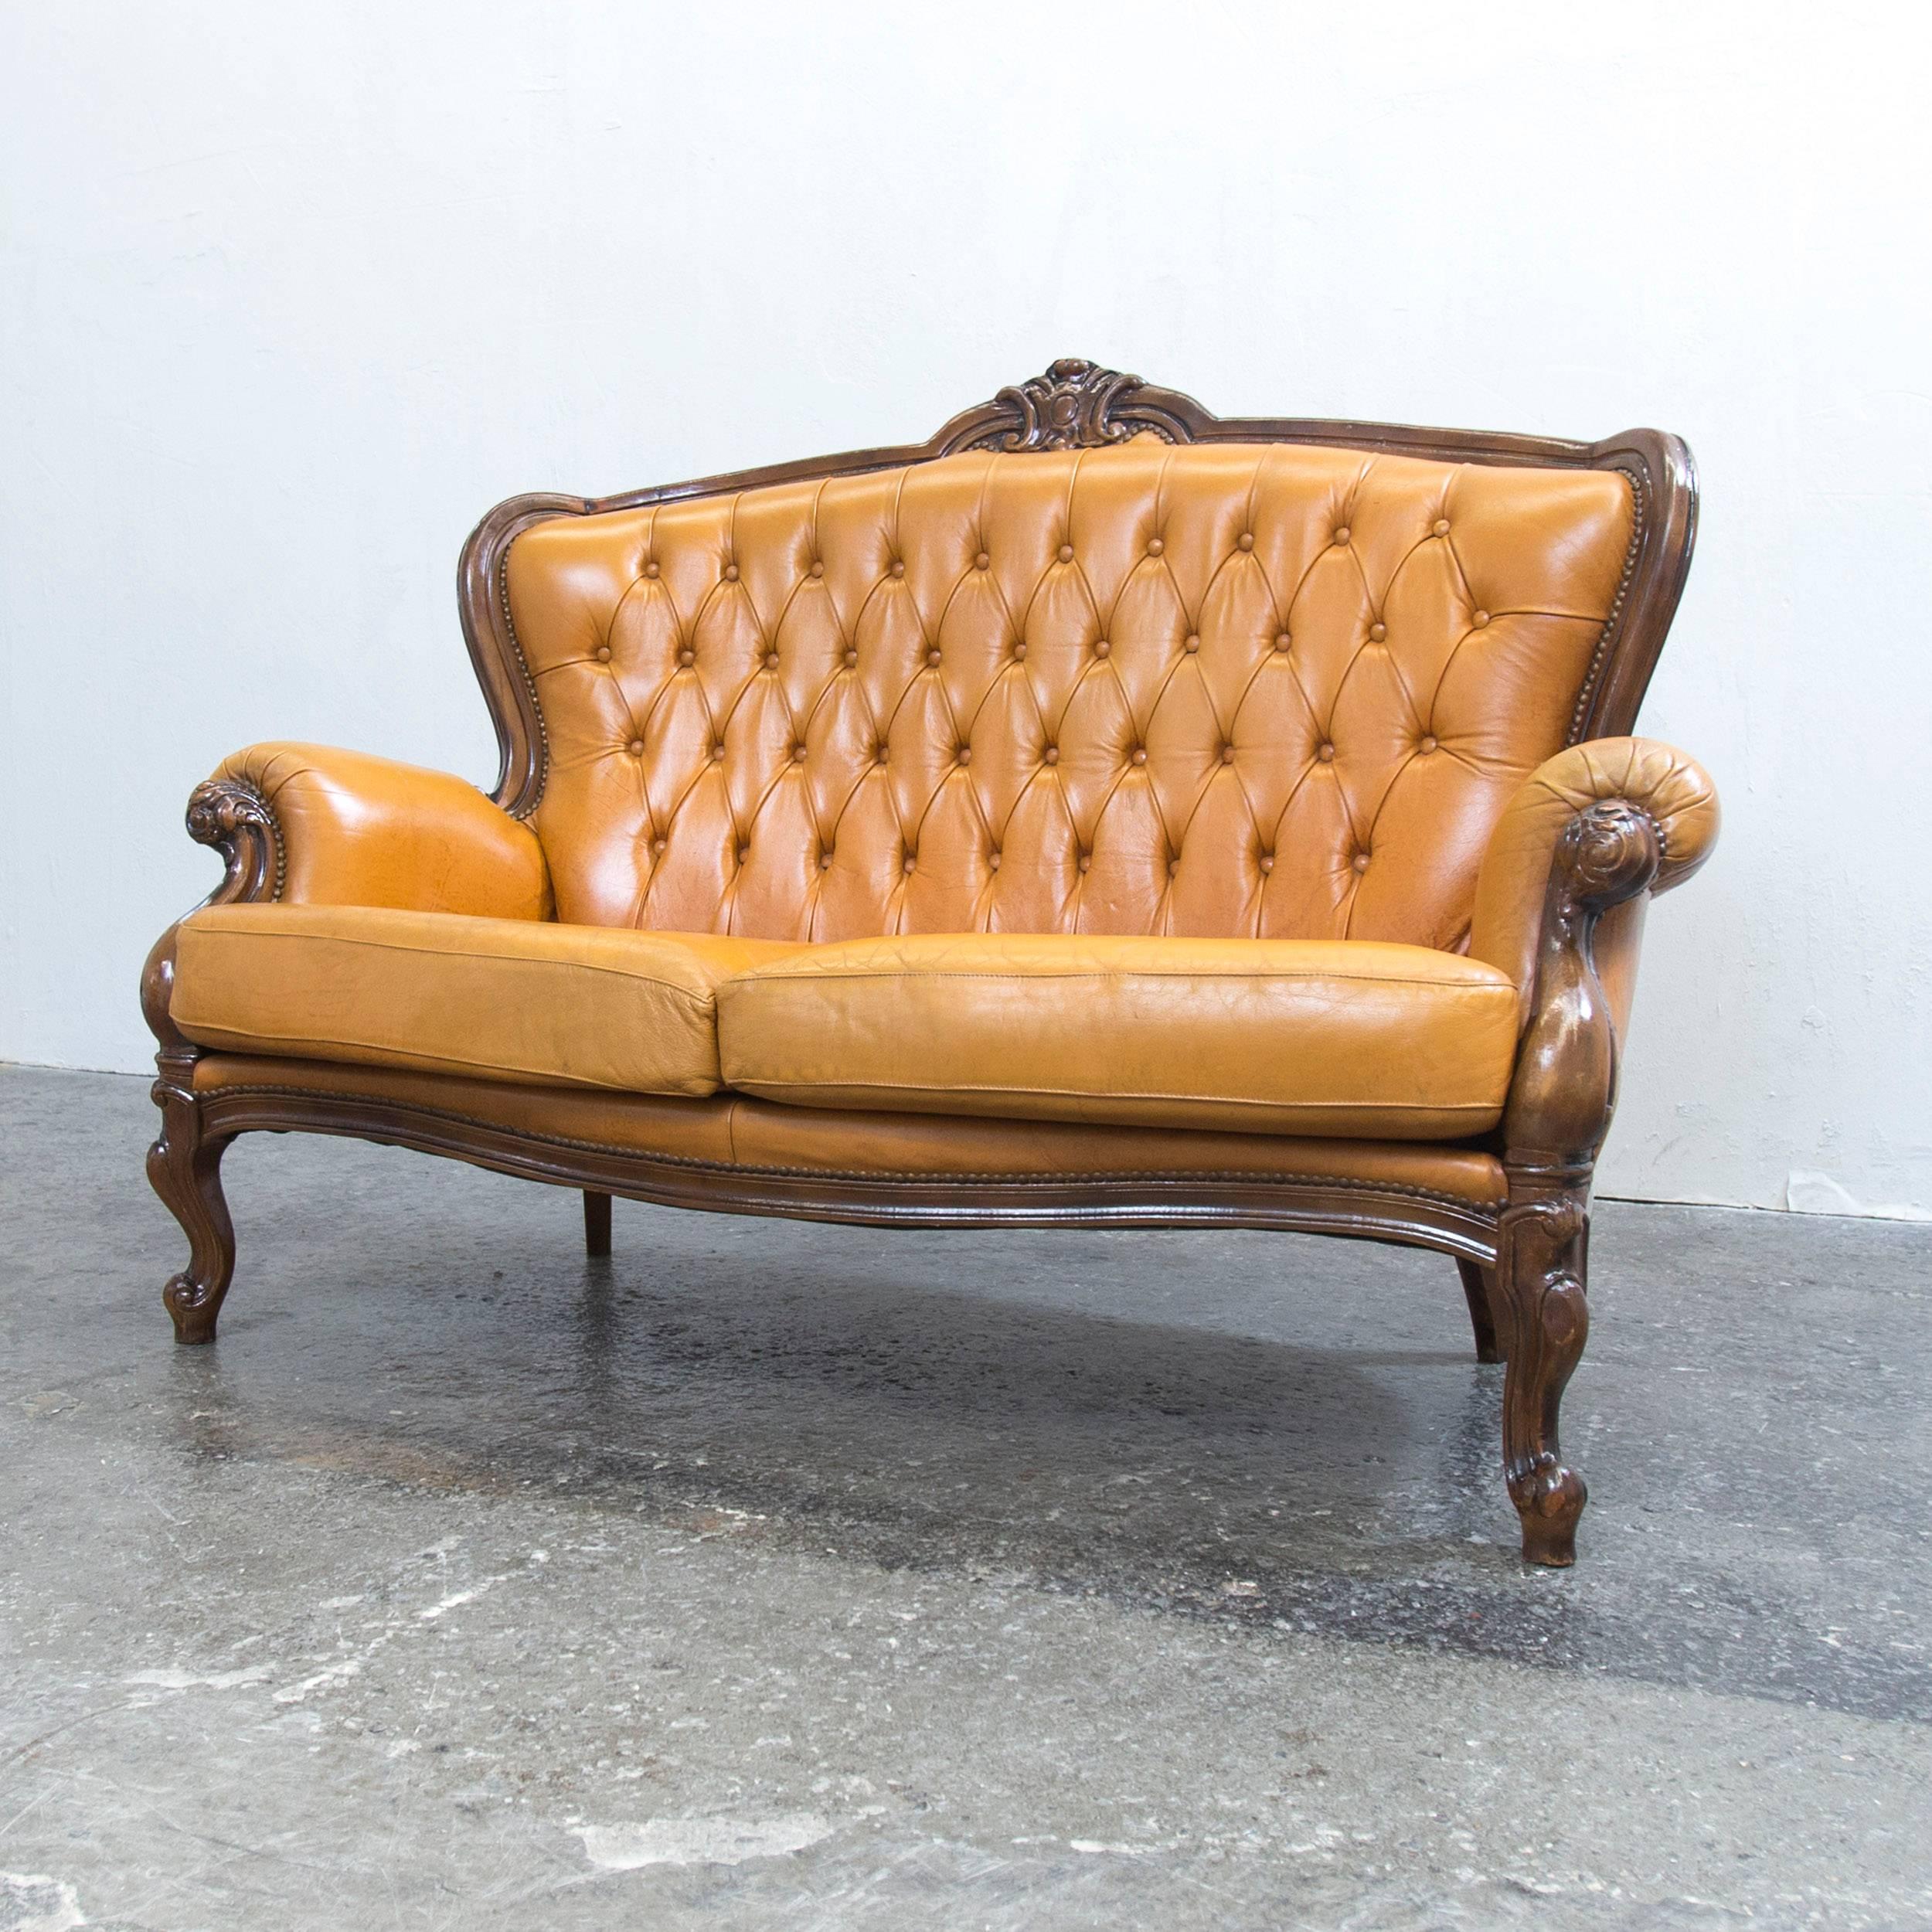 Cognac brown colored Chesterfield leather sofa in a vintage style, designed for pure elegance and comfort.